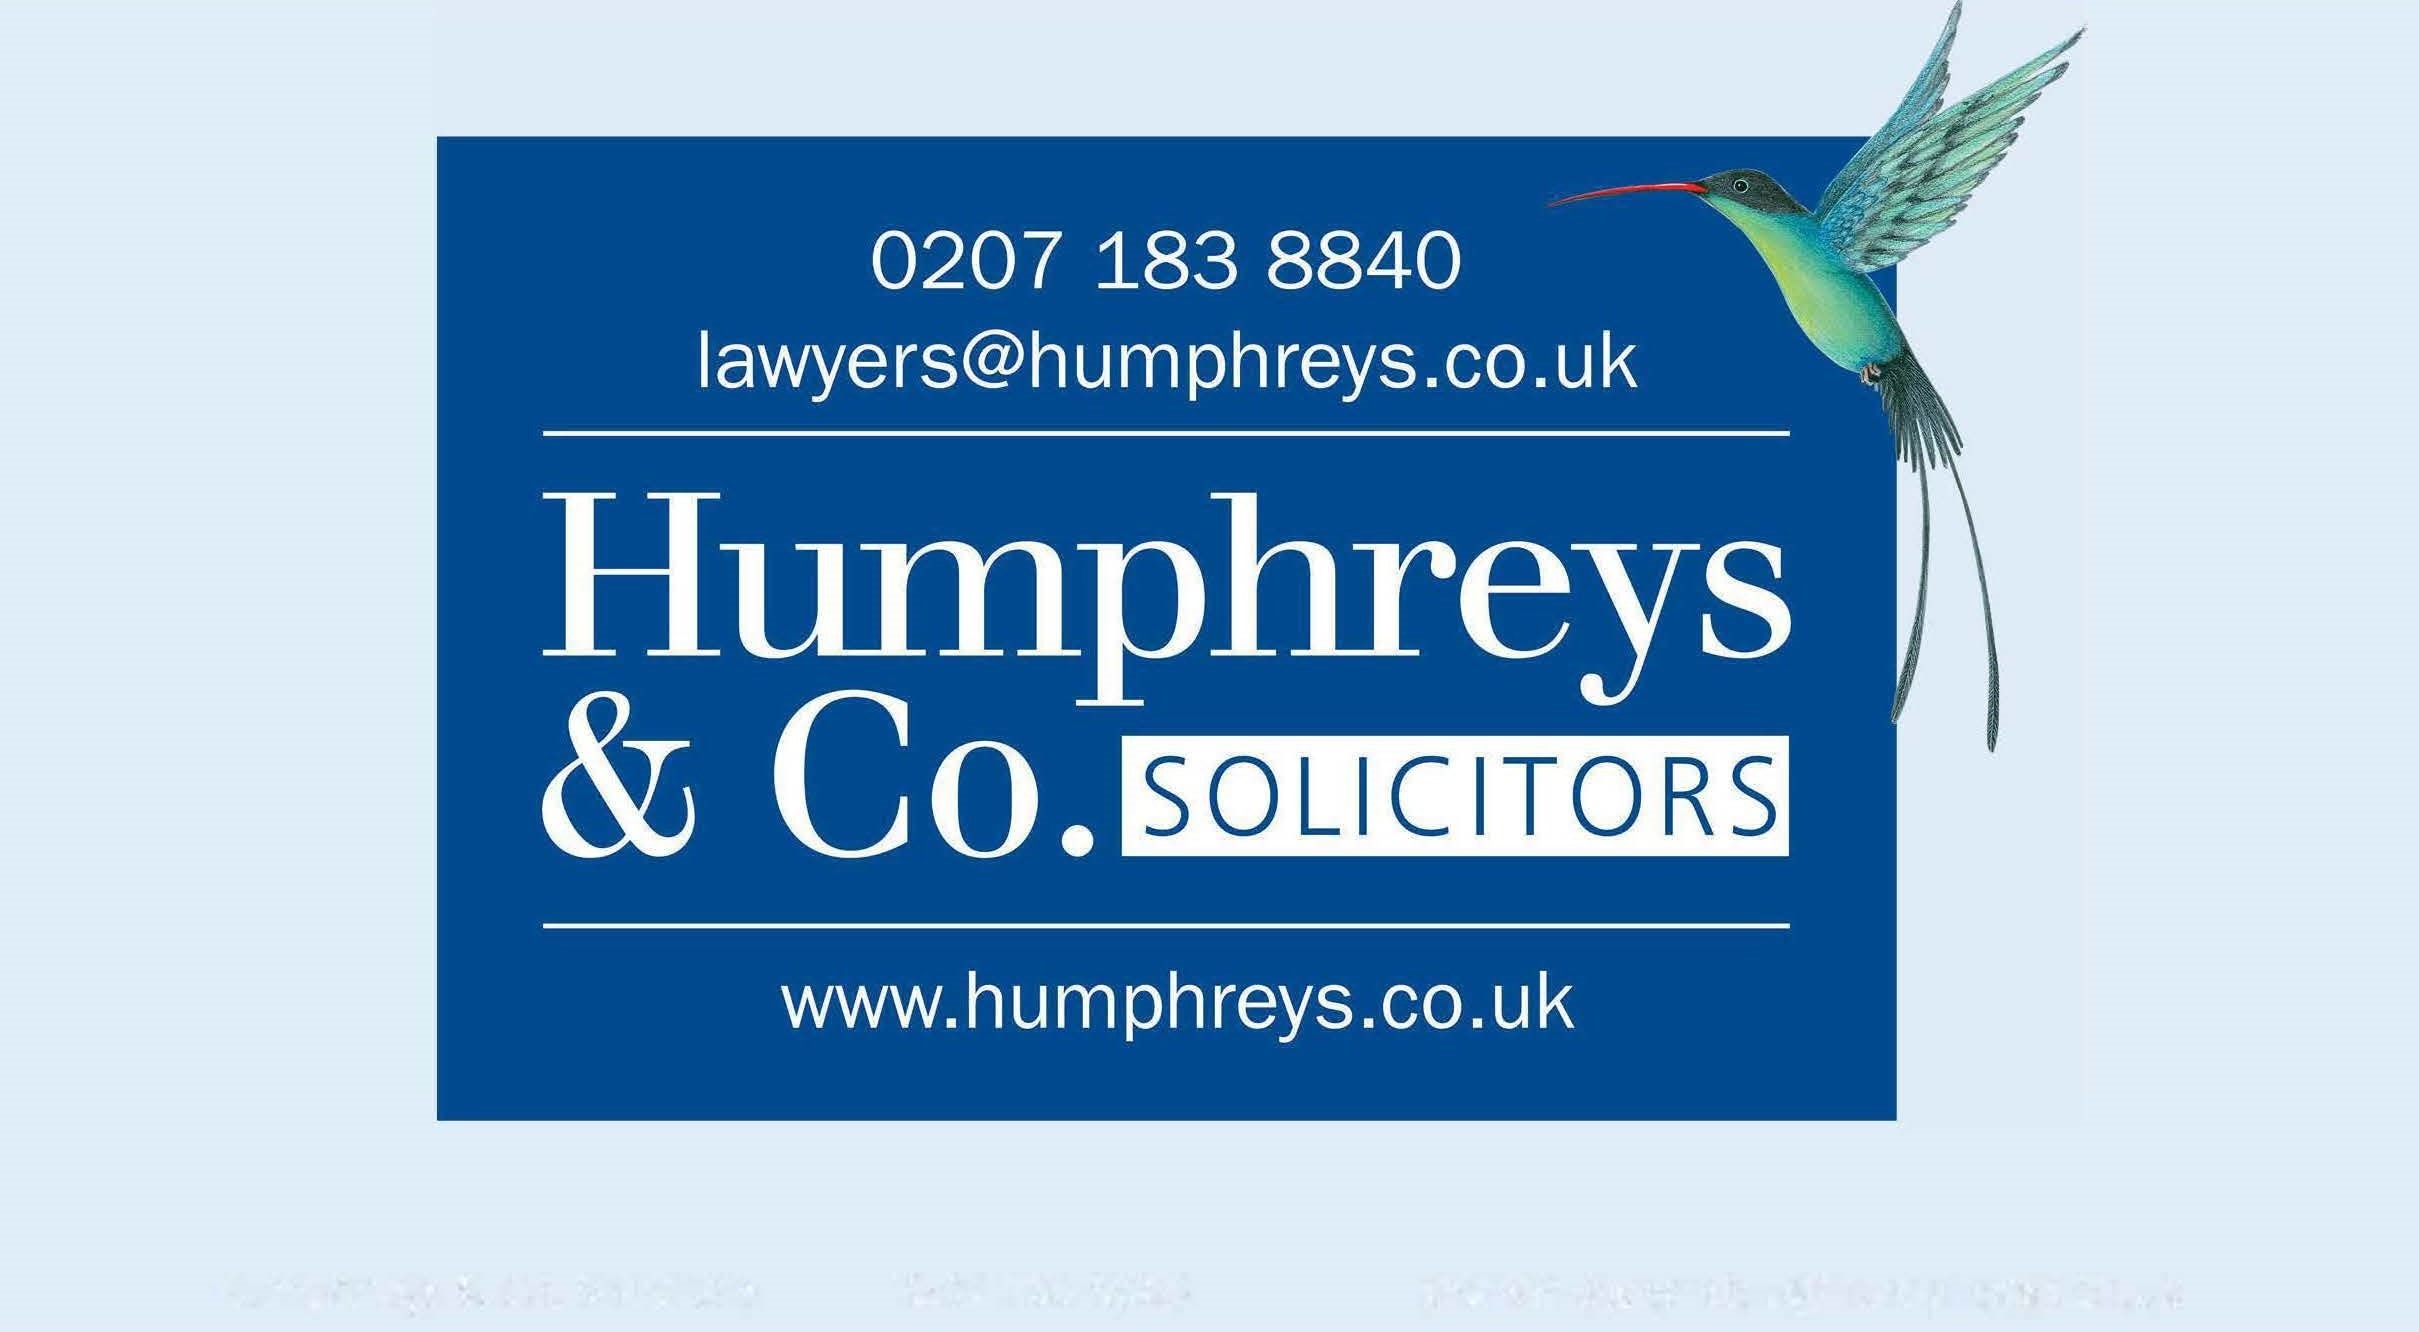 Humphreys & Co. Solicitors logo. Start your home-buying journey on Share to Buy today!